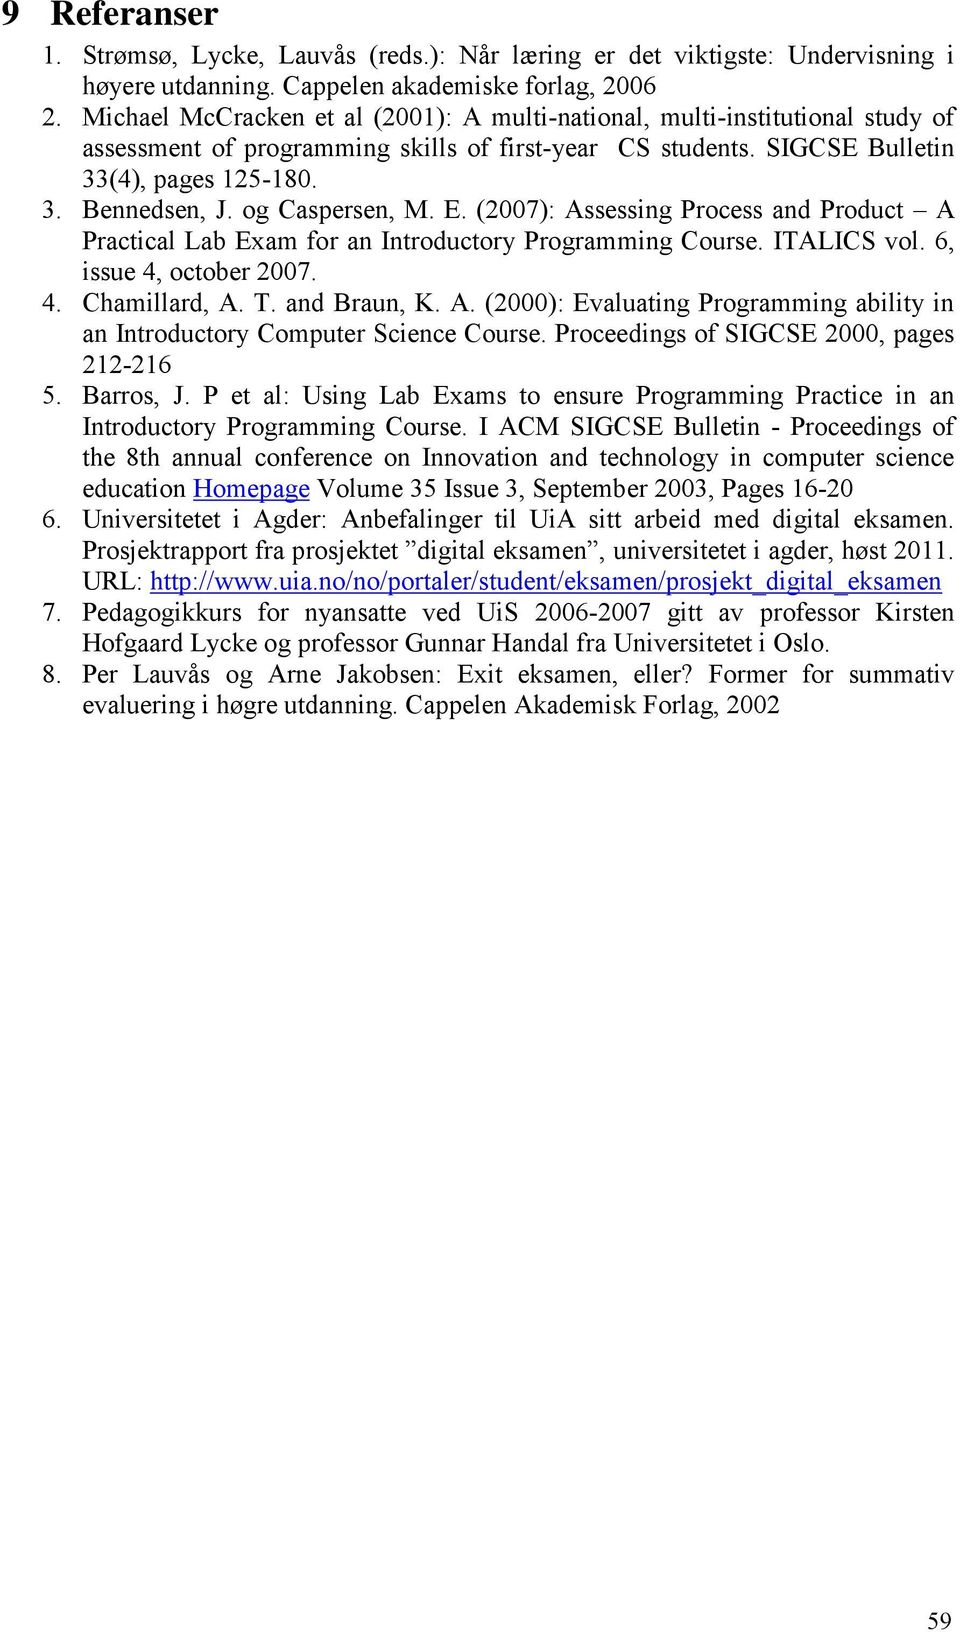 og Caspersen, M. E. (2007): Assessing Process and Product A Practical Lab Exam for an Introductory Programming Course. ITALICS vol. 6, issue 4, october 2007. 4. Chamillard, A. T. and Braun, K. A. (2000): Evaluating Programming ability in an Introductory Computer Science Course.